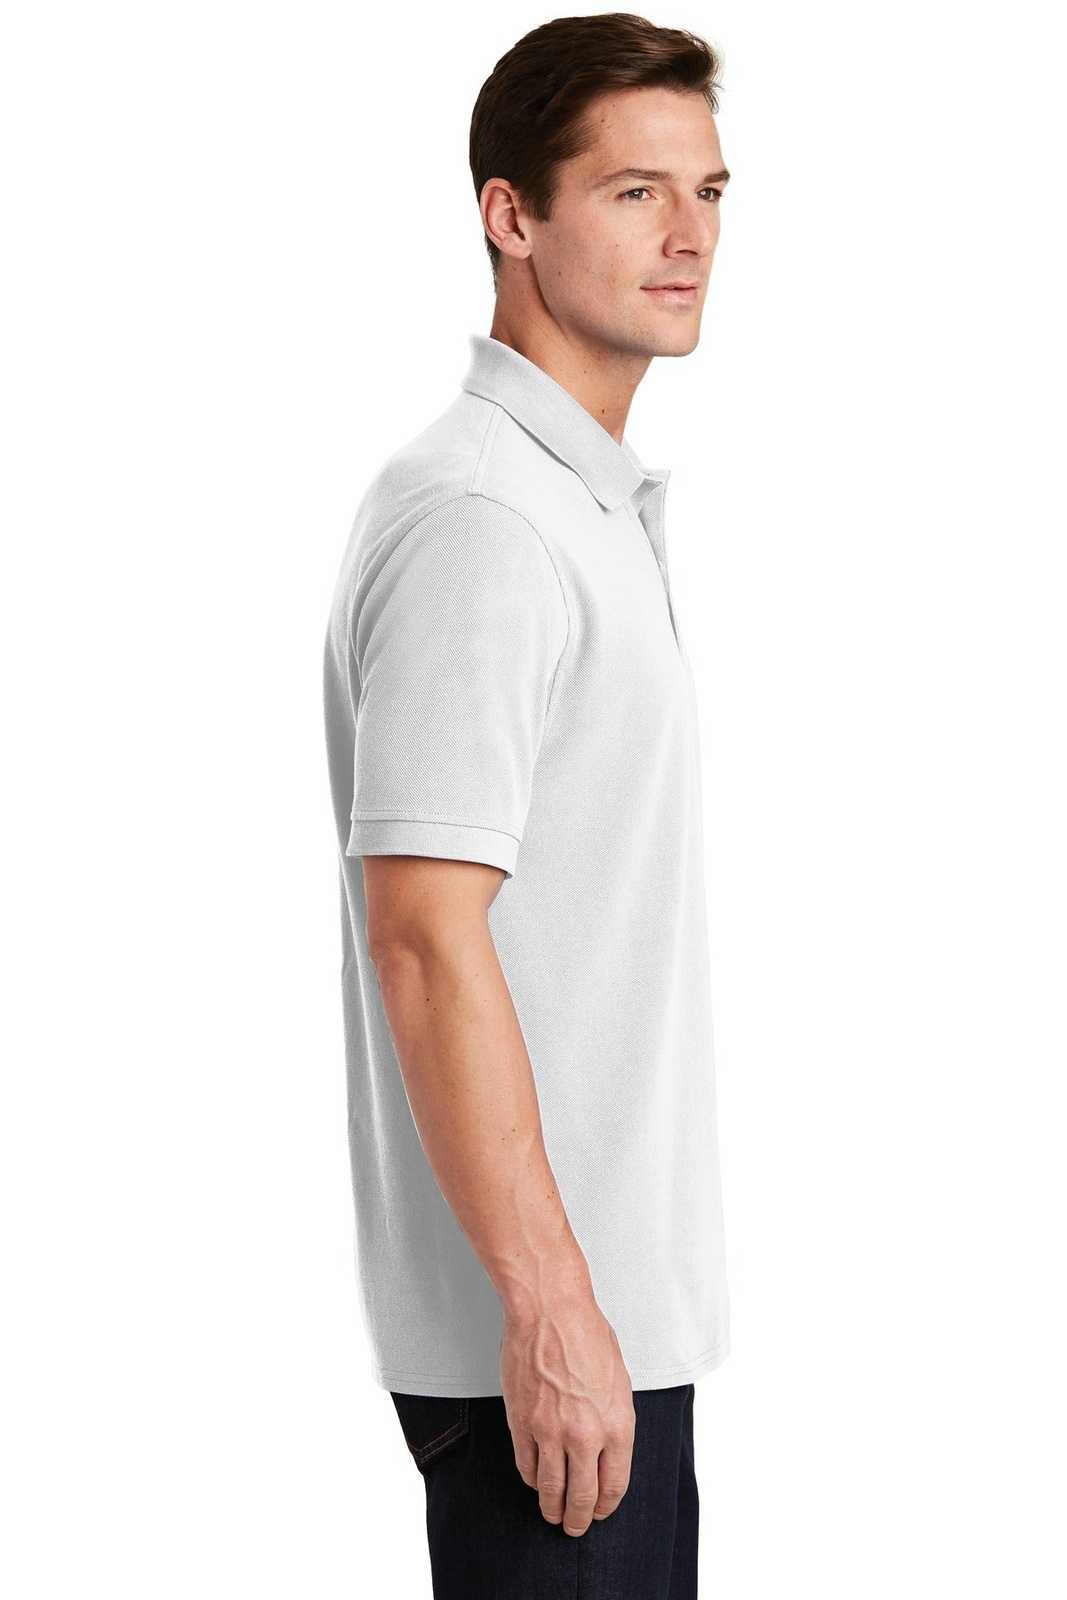 Port &amp; Company KP1500 Combed Ring Spun Pique Polo - White - HIT a Double - 3